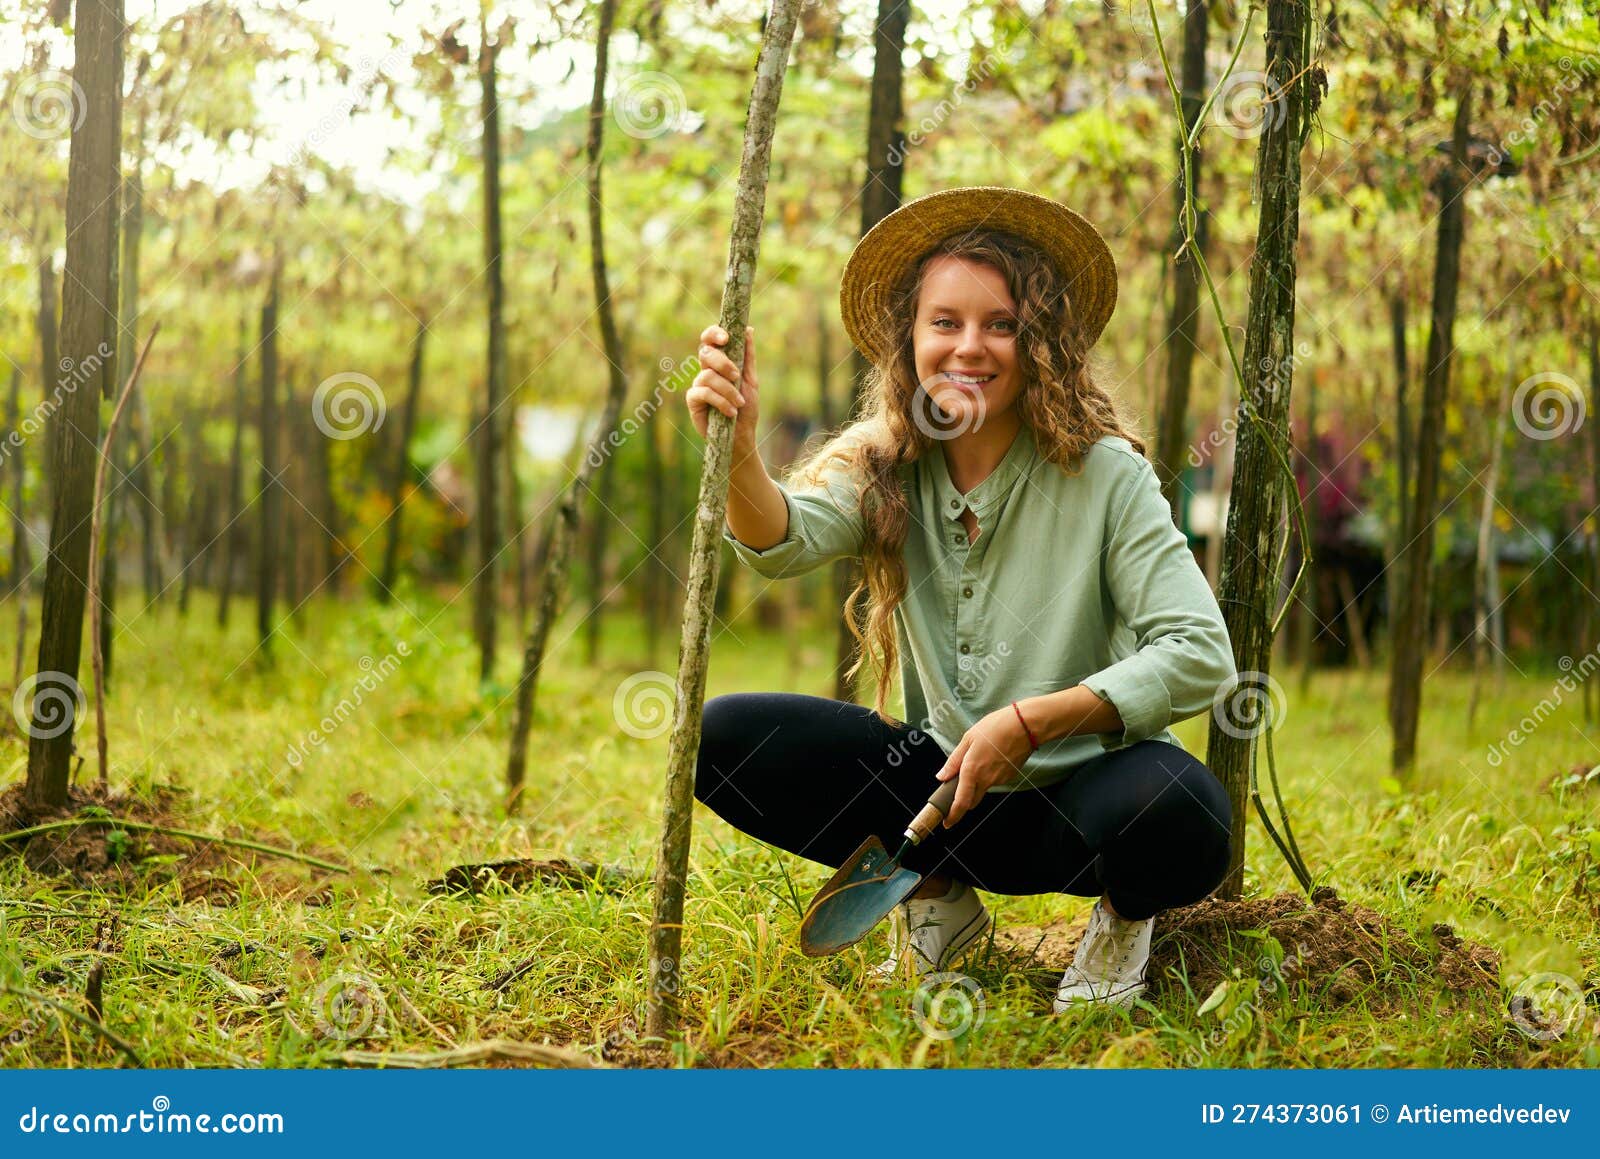 young female gardener smiles on her farm sitting with garden trowel in soil among plants. happy cauasian woman in her